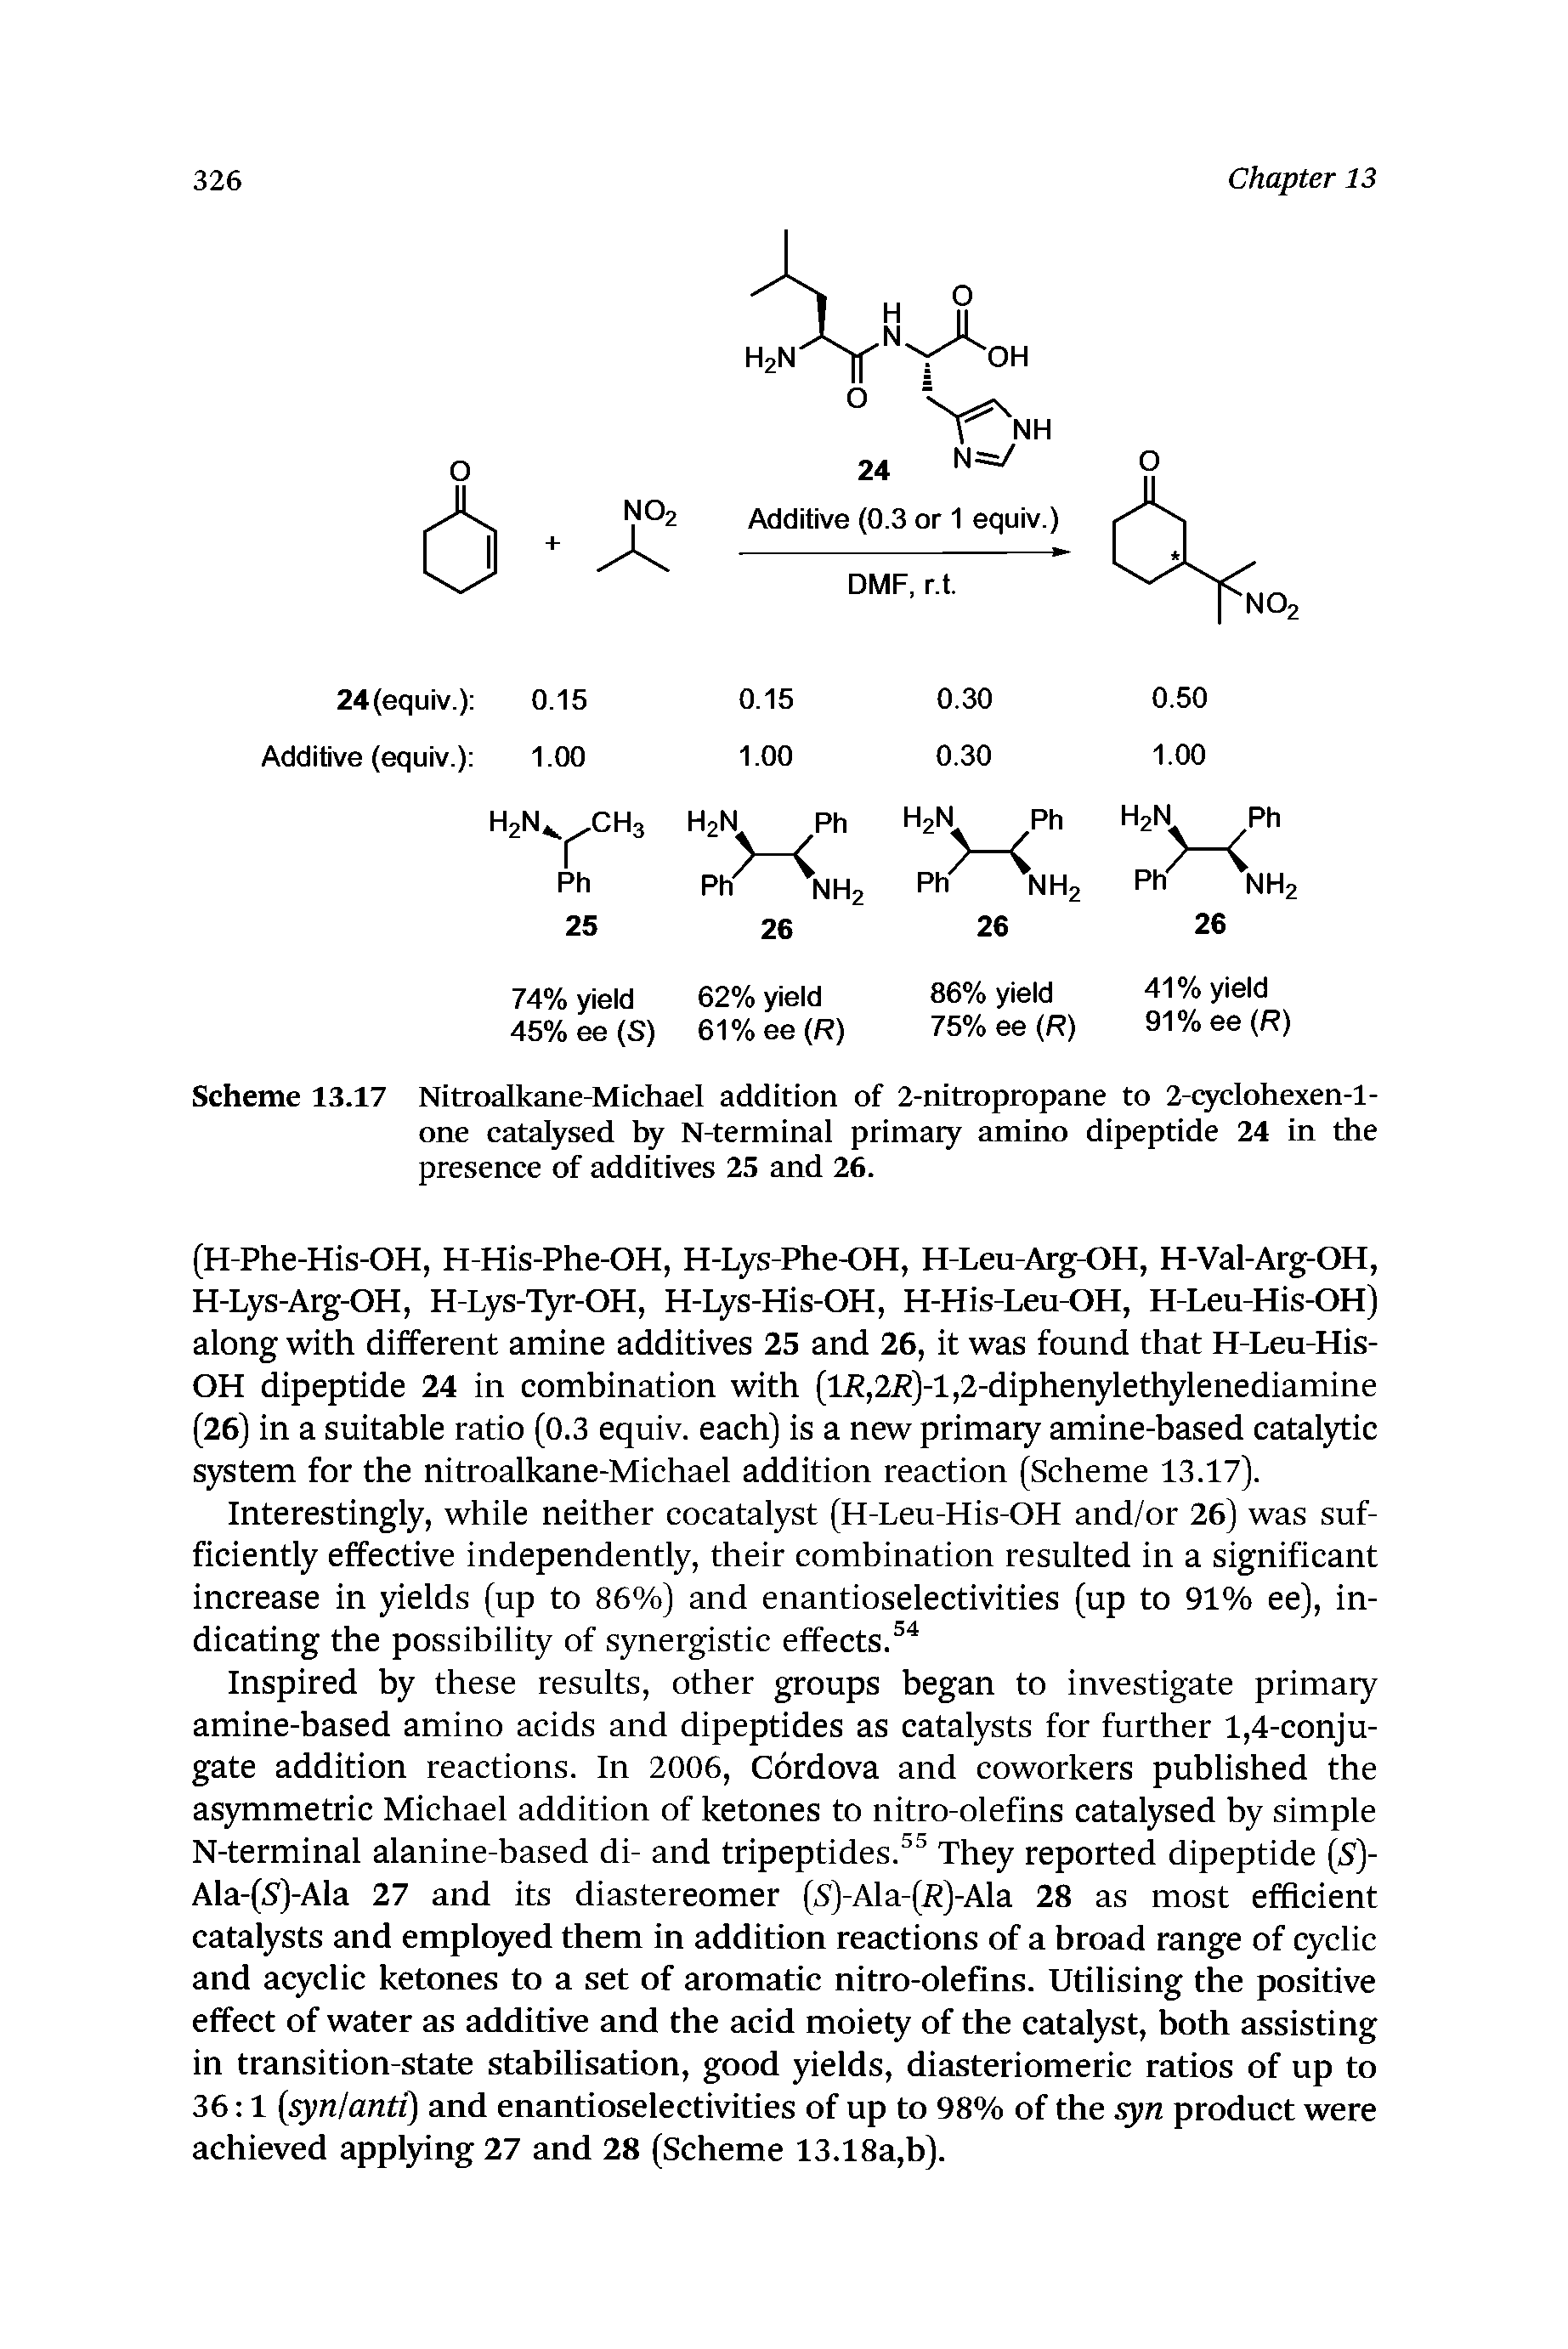 Scheme 13.17 Nitroalkane-Michael addition of 2-nitropropane to 2-tyclohexen-l-one catalysed N-terminal primary amino dipeptide 24 in the presence of additives 25 and 26.